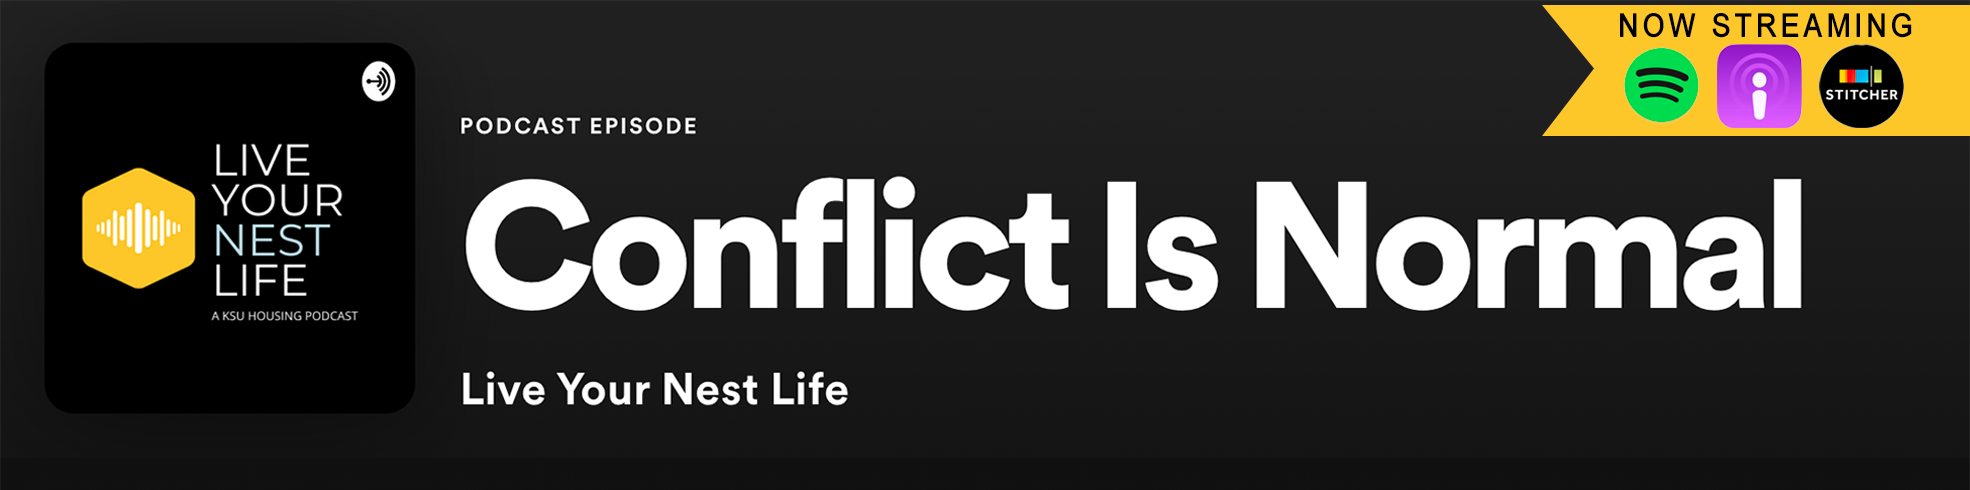 New Podcast Alert: Conflict is Normal